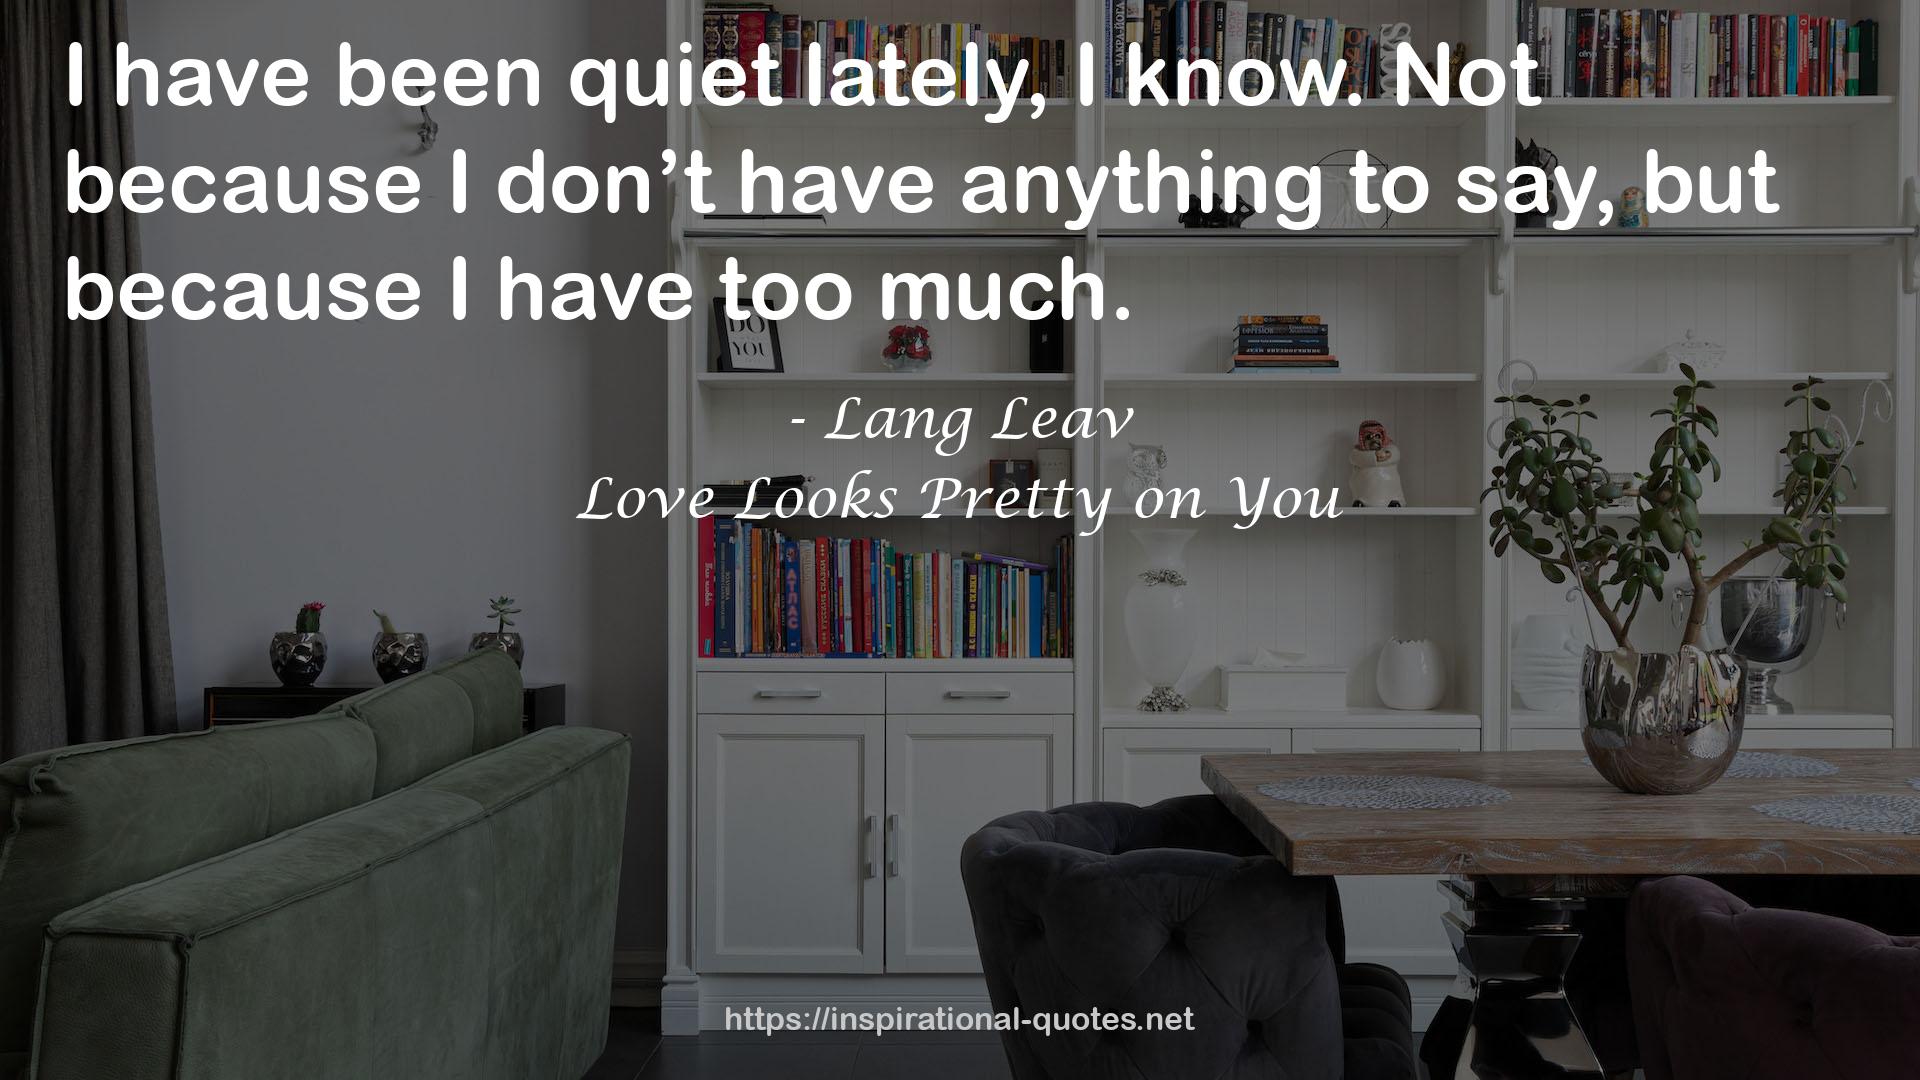 Love Looks Pretty on You QUOTES